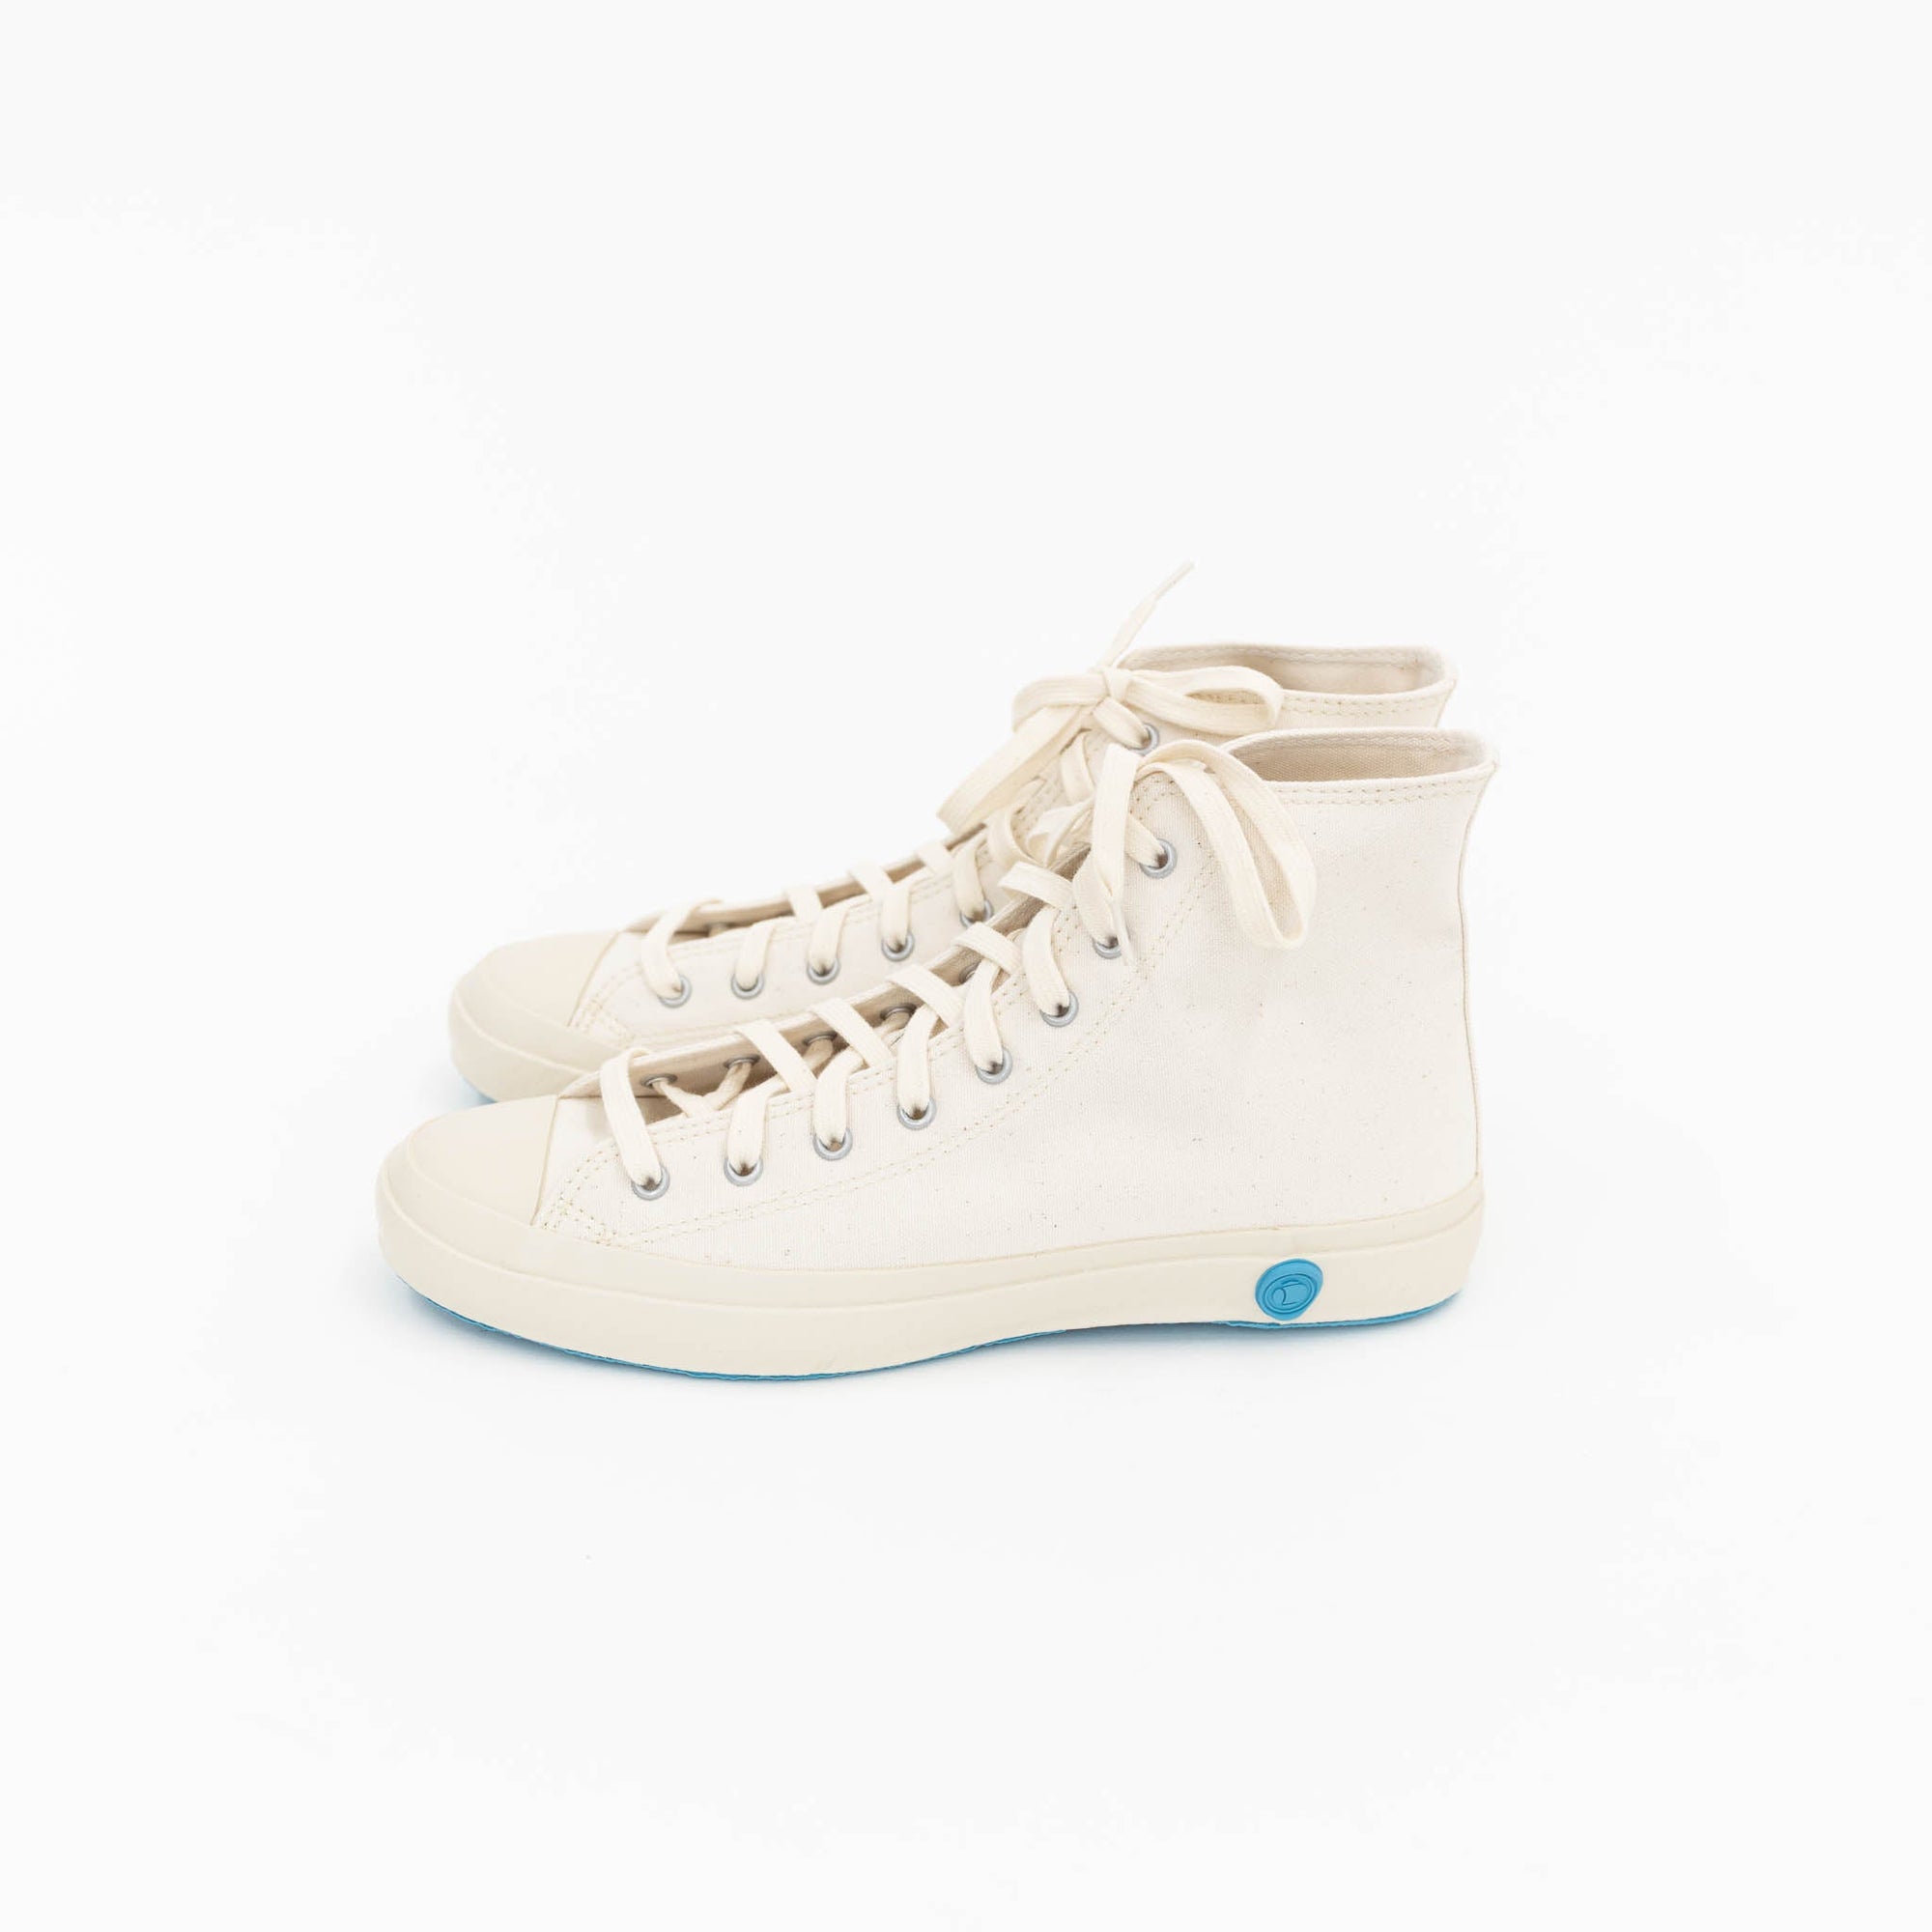 Moonstar Shoes Like Pottery Hi Tops White Shoes | Tortoise General Store